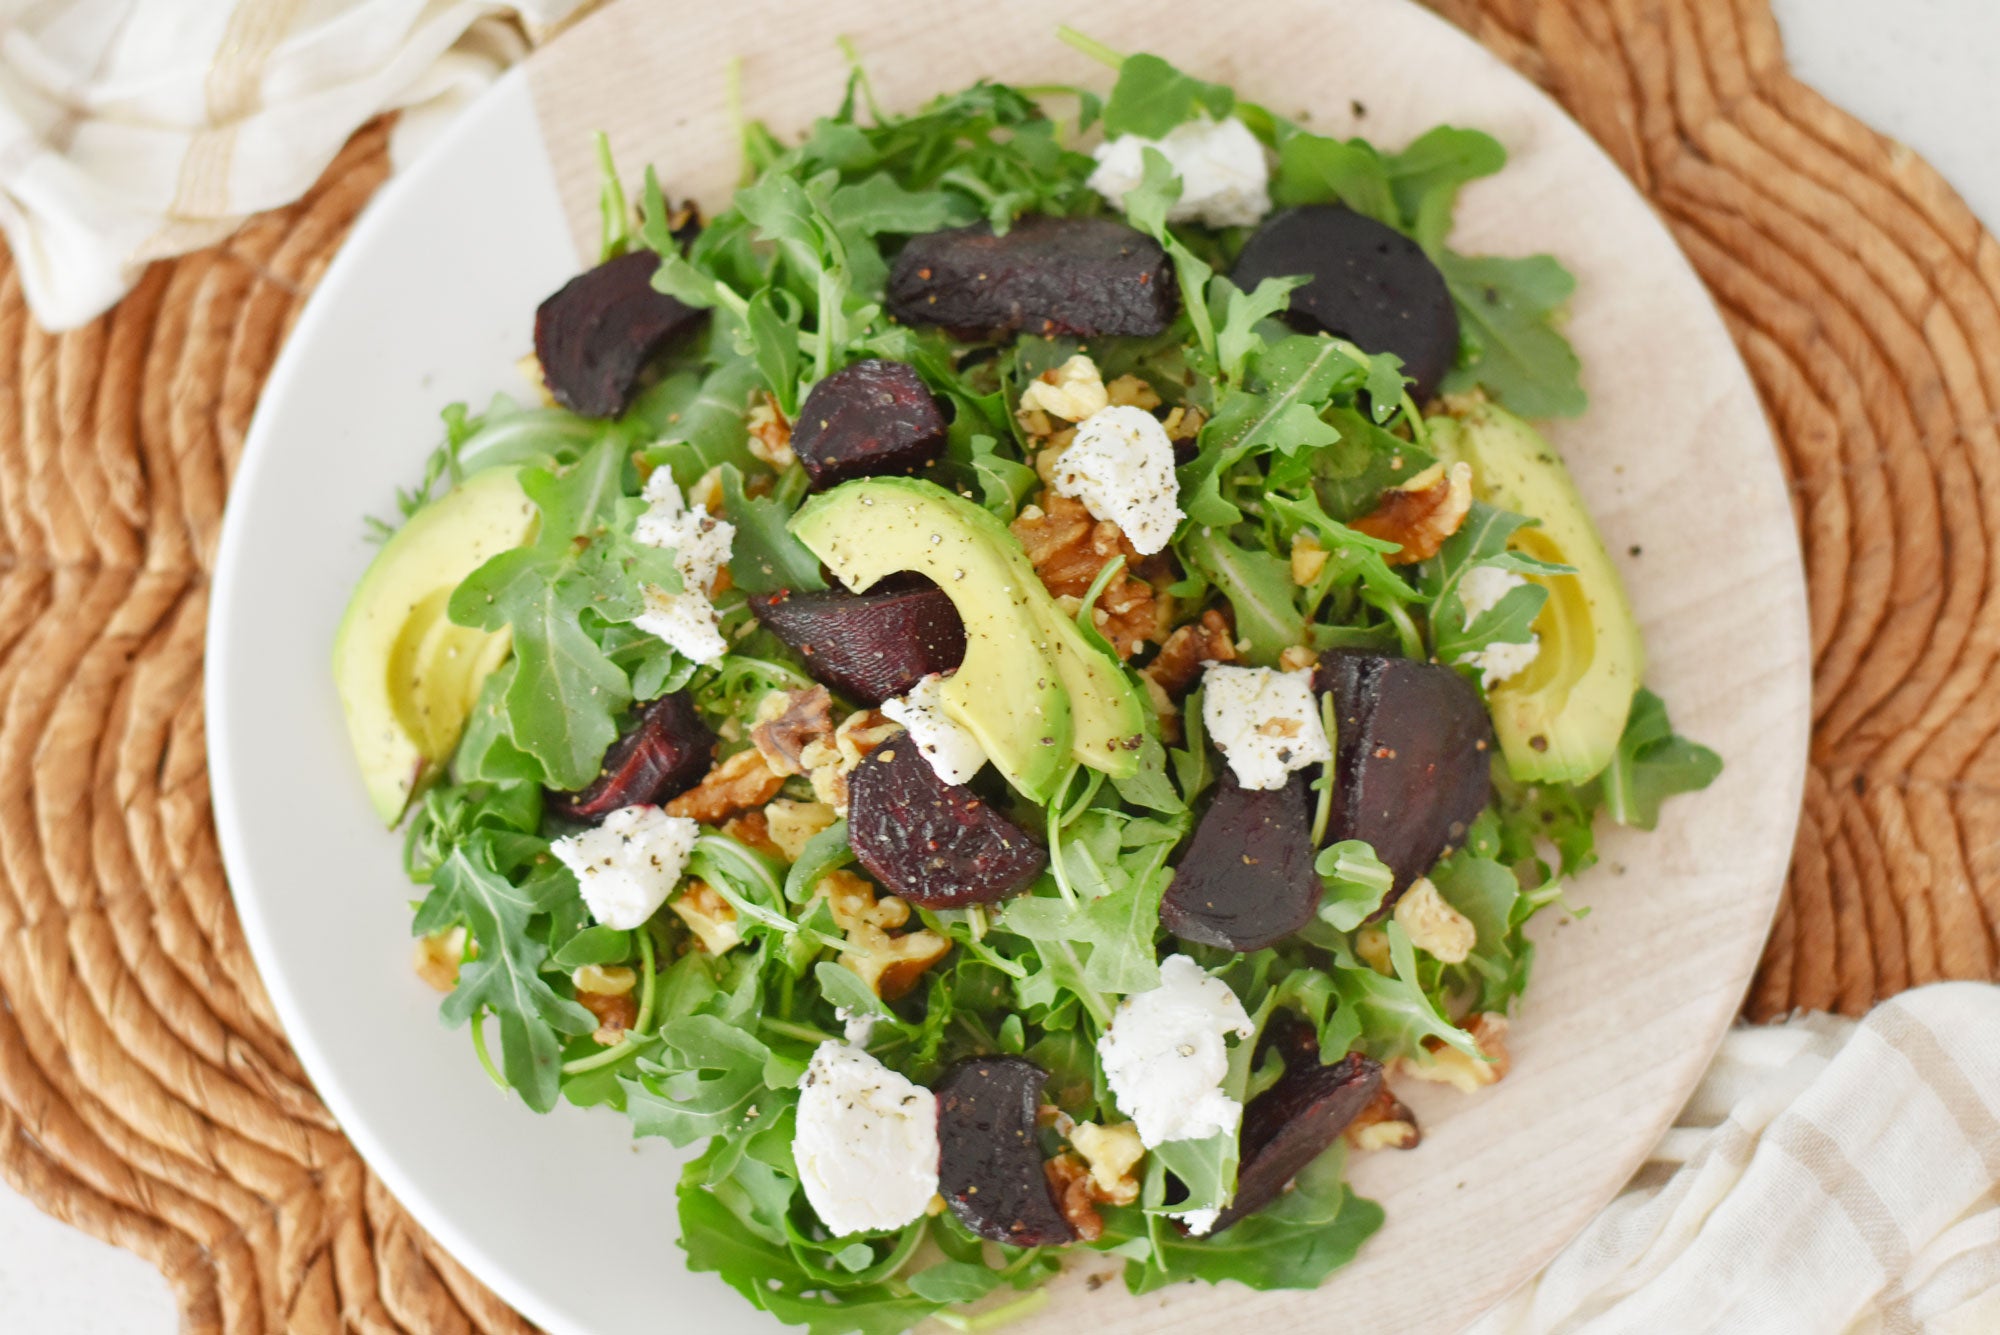 Beet, Goat Cheese and Walnut Salad with Balsamic Vinaigrette